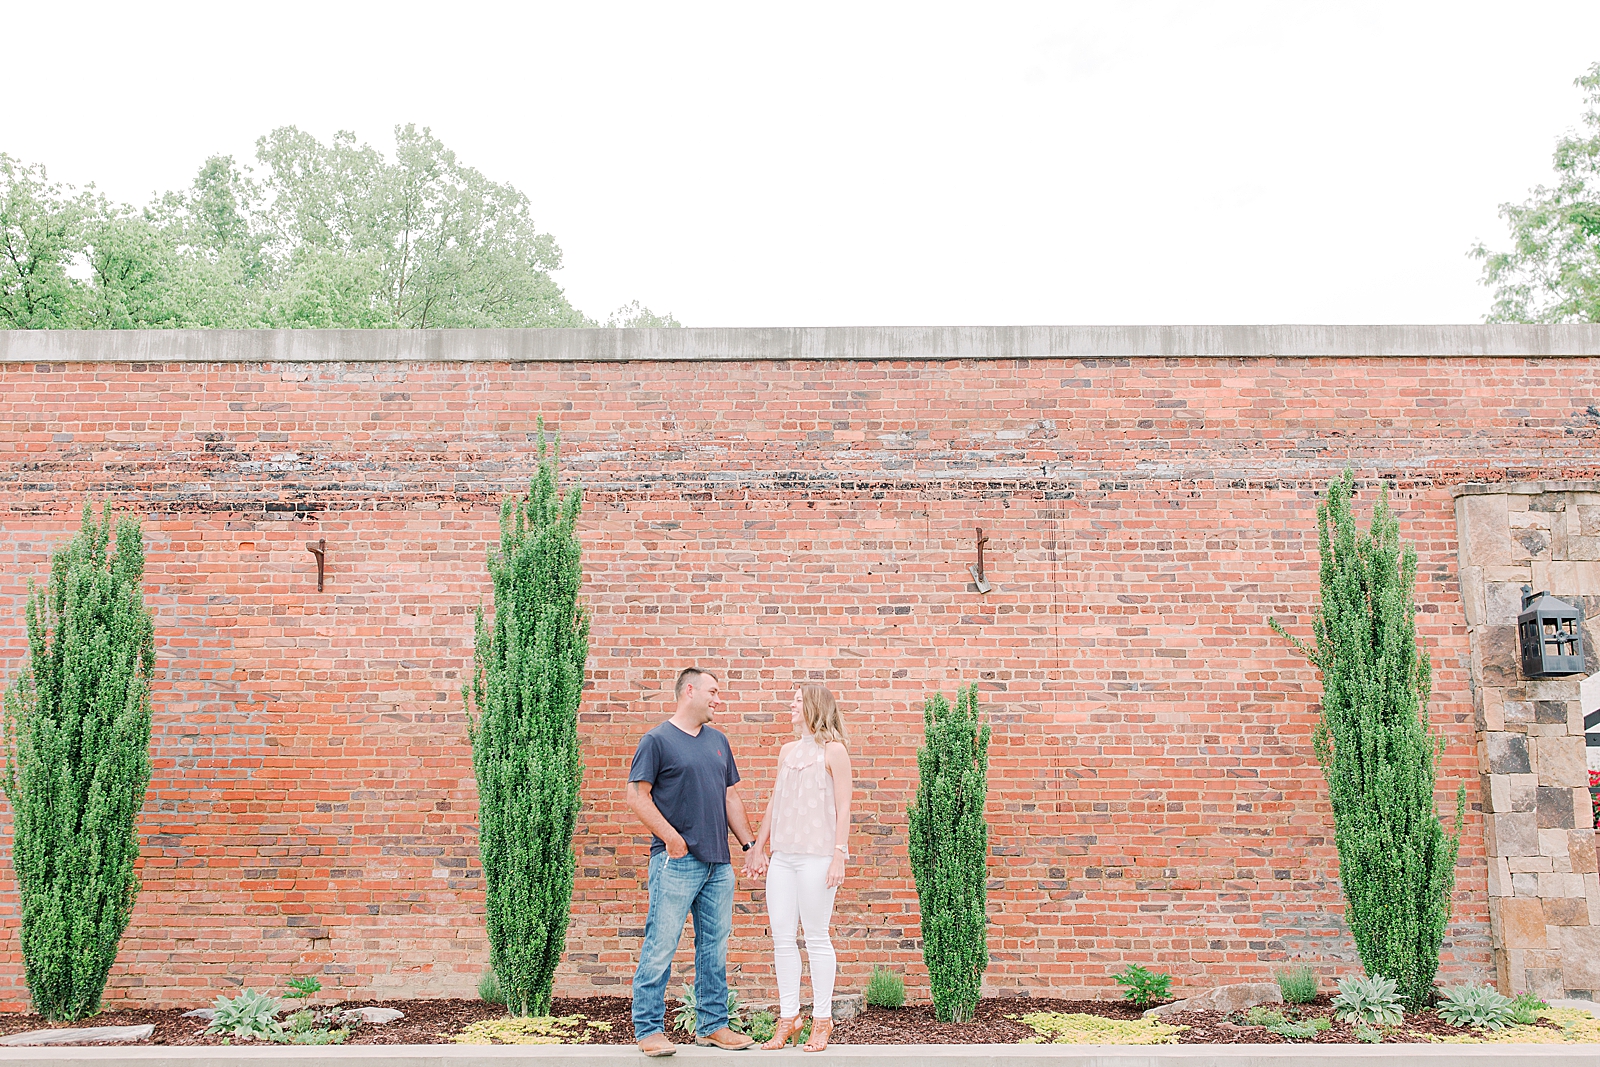 Hackney Warehouse Engagement Session couple in front of brick wall smiling at each other Photo